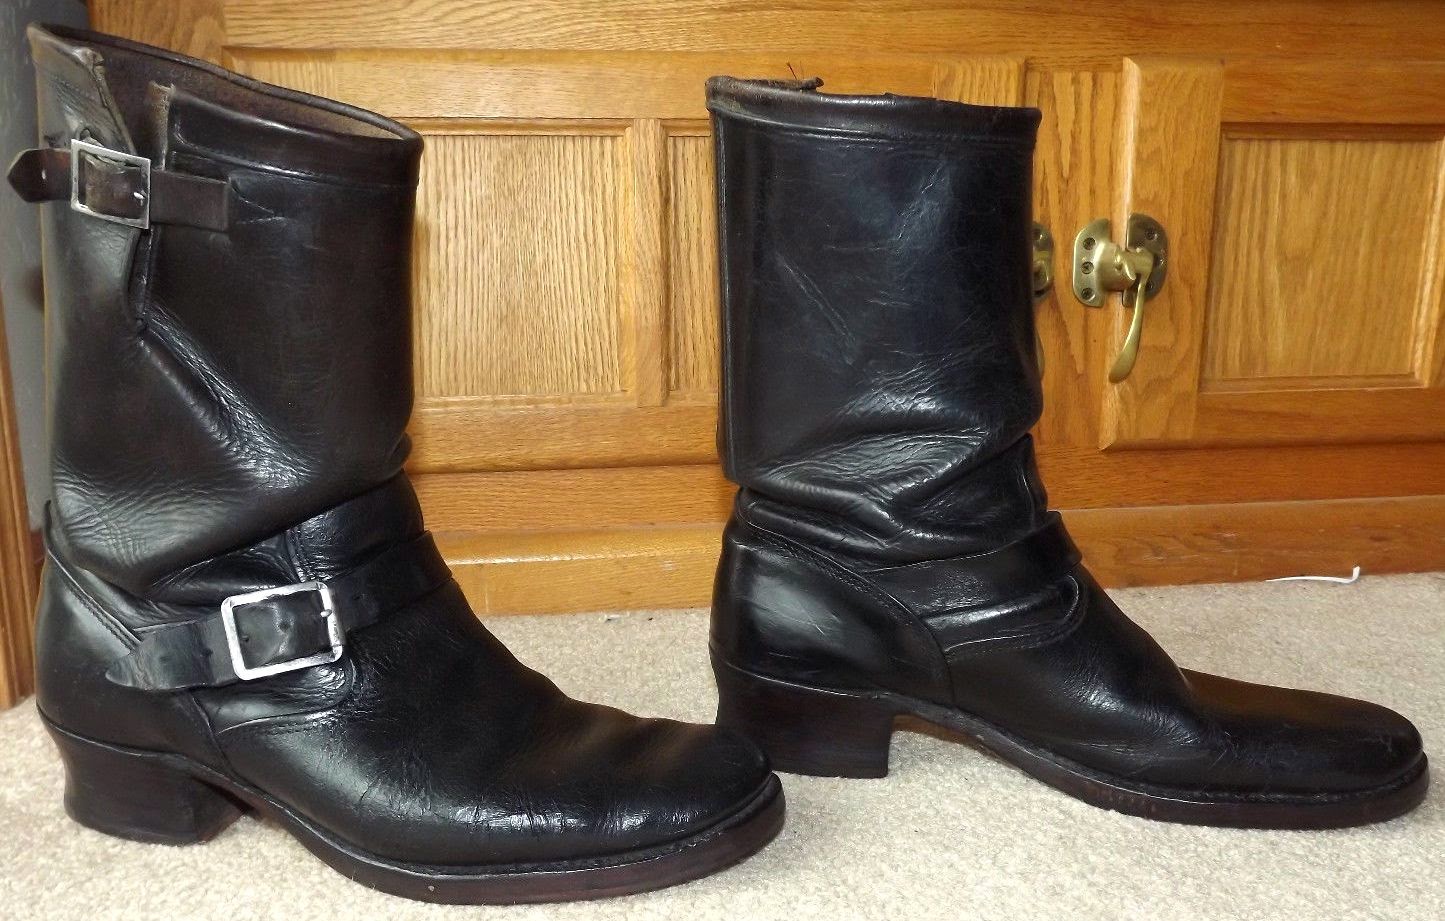 Vintage Engineer Boots: 1940'S CHIPPEWA ENGINEER BOOTS (NOT HORSEHIDE)